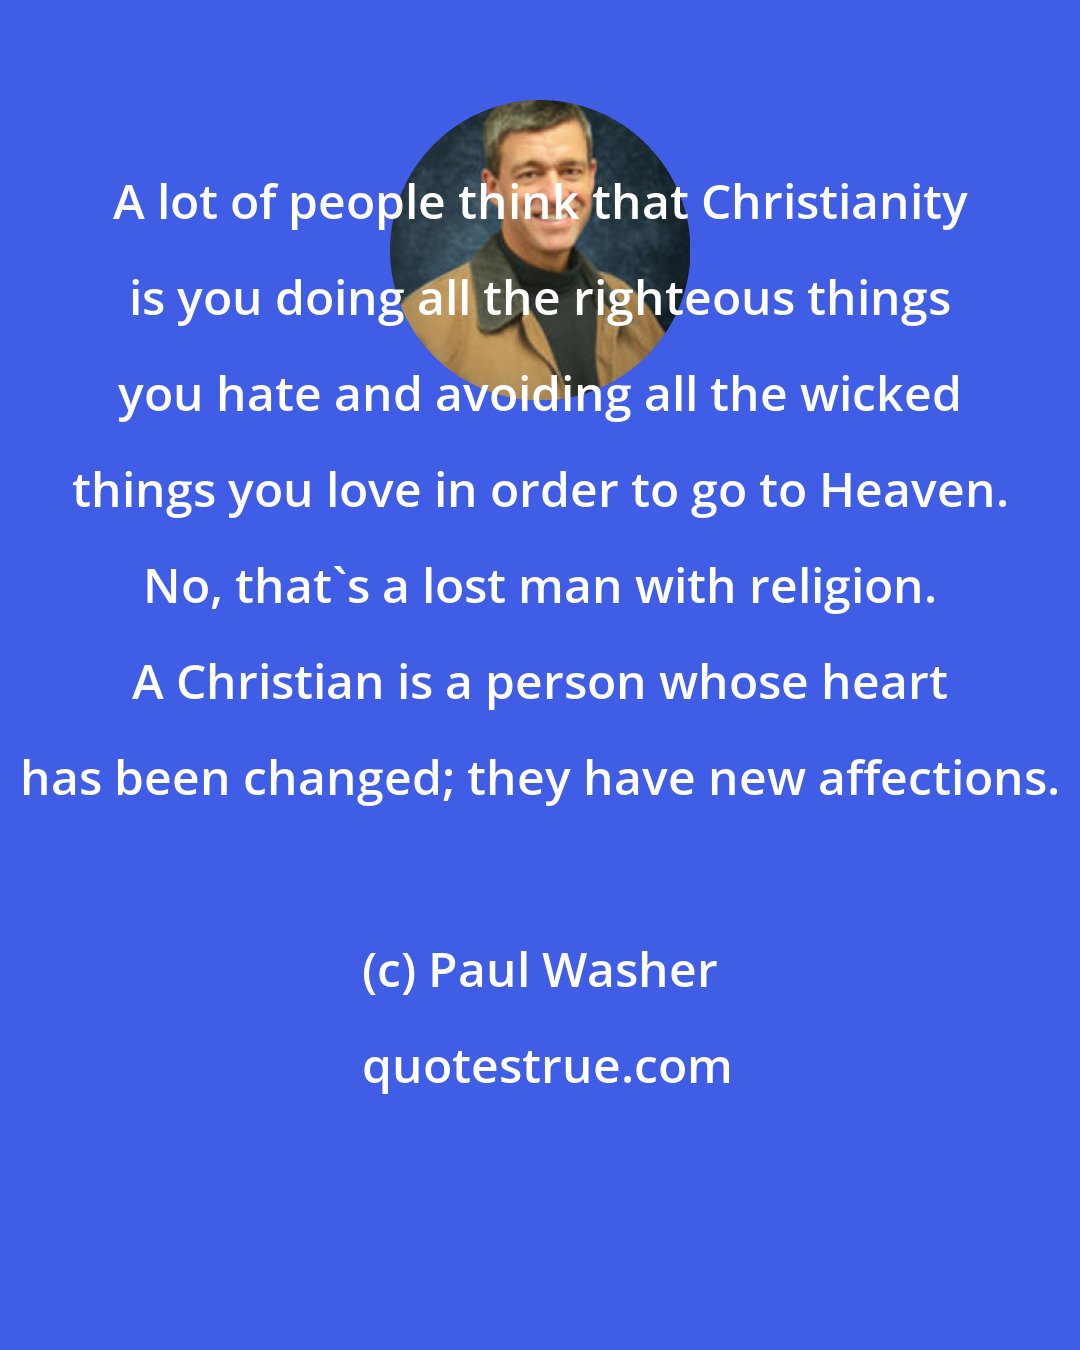 Paul Washer: A lot of people think that Christianity is you doing all the righteous things you hate and avoiding all the wicked things you love in order to go to Heaven. No, that's a lost man with religion. A Christian is a person whose heart has been changed; they have new affections.